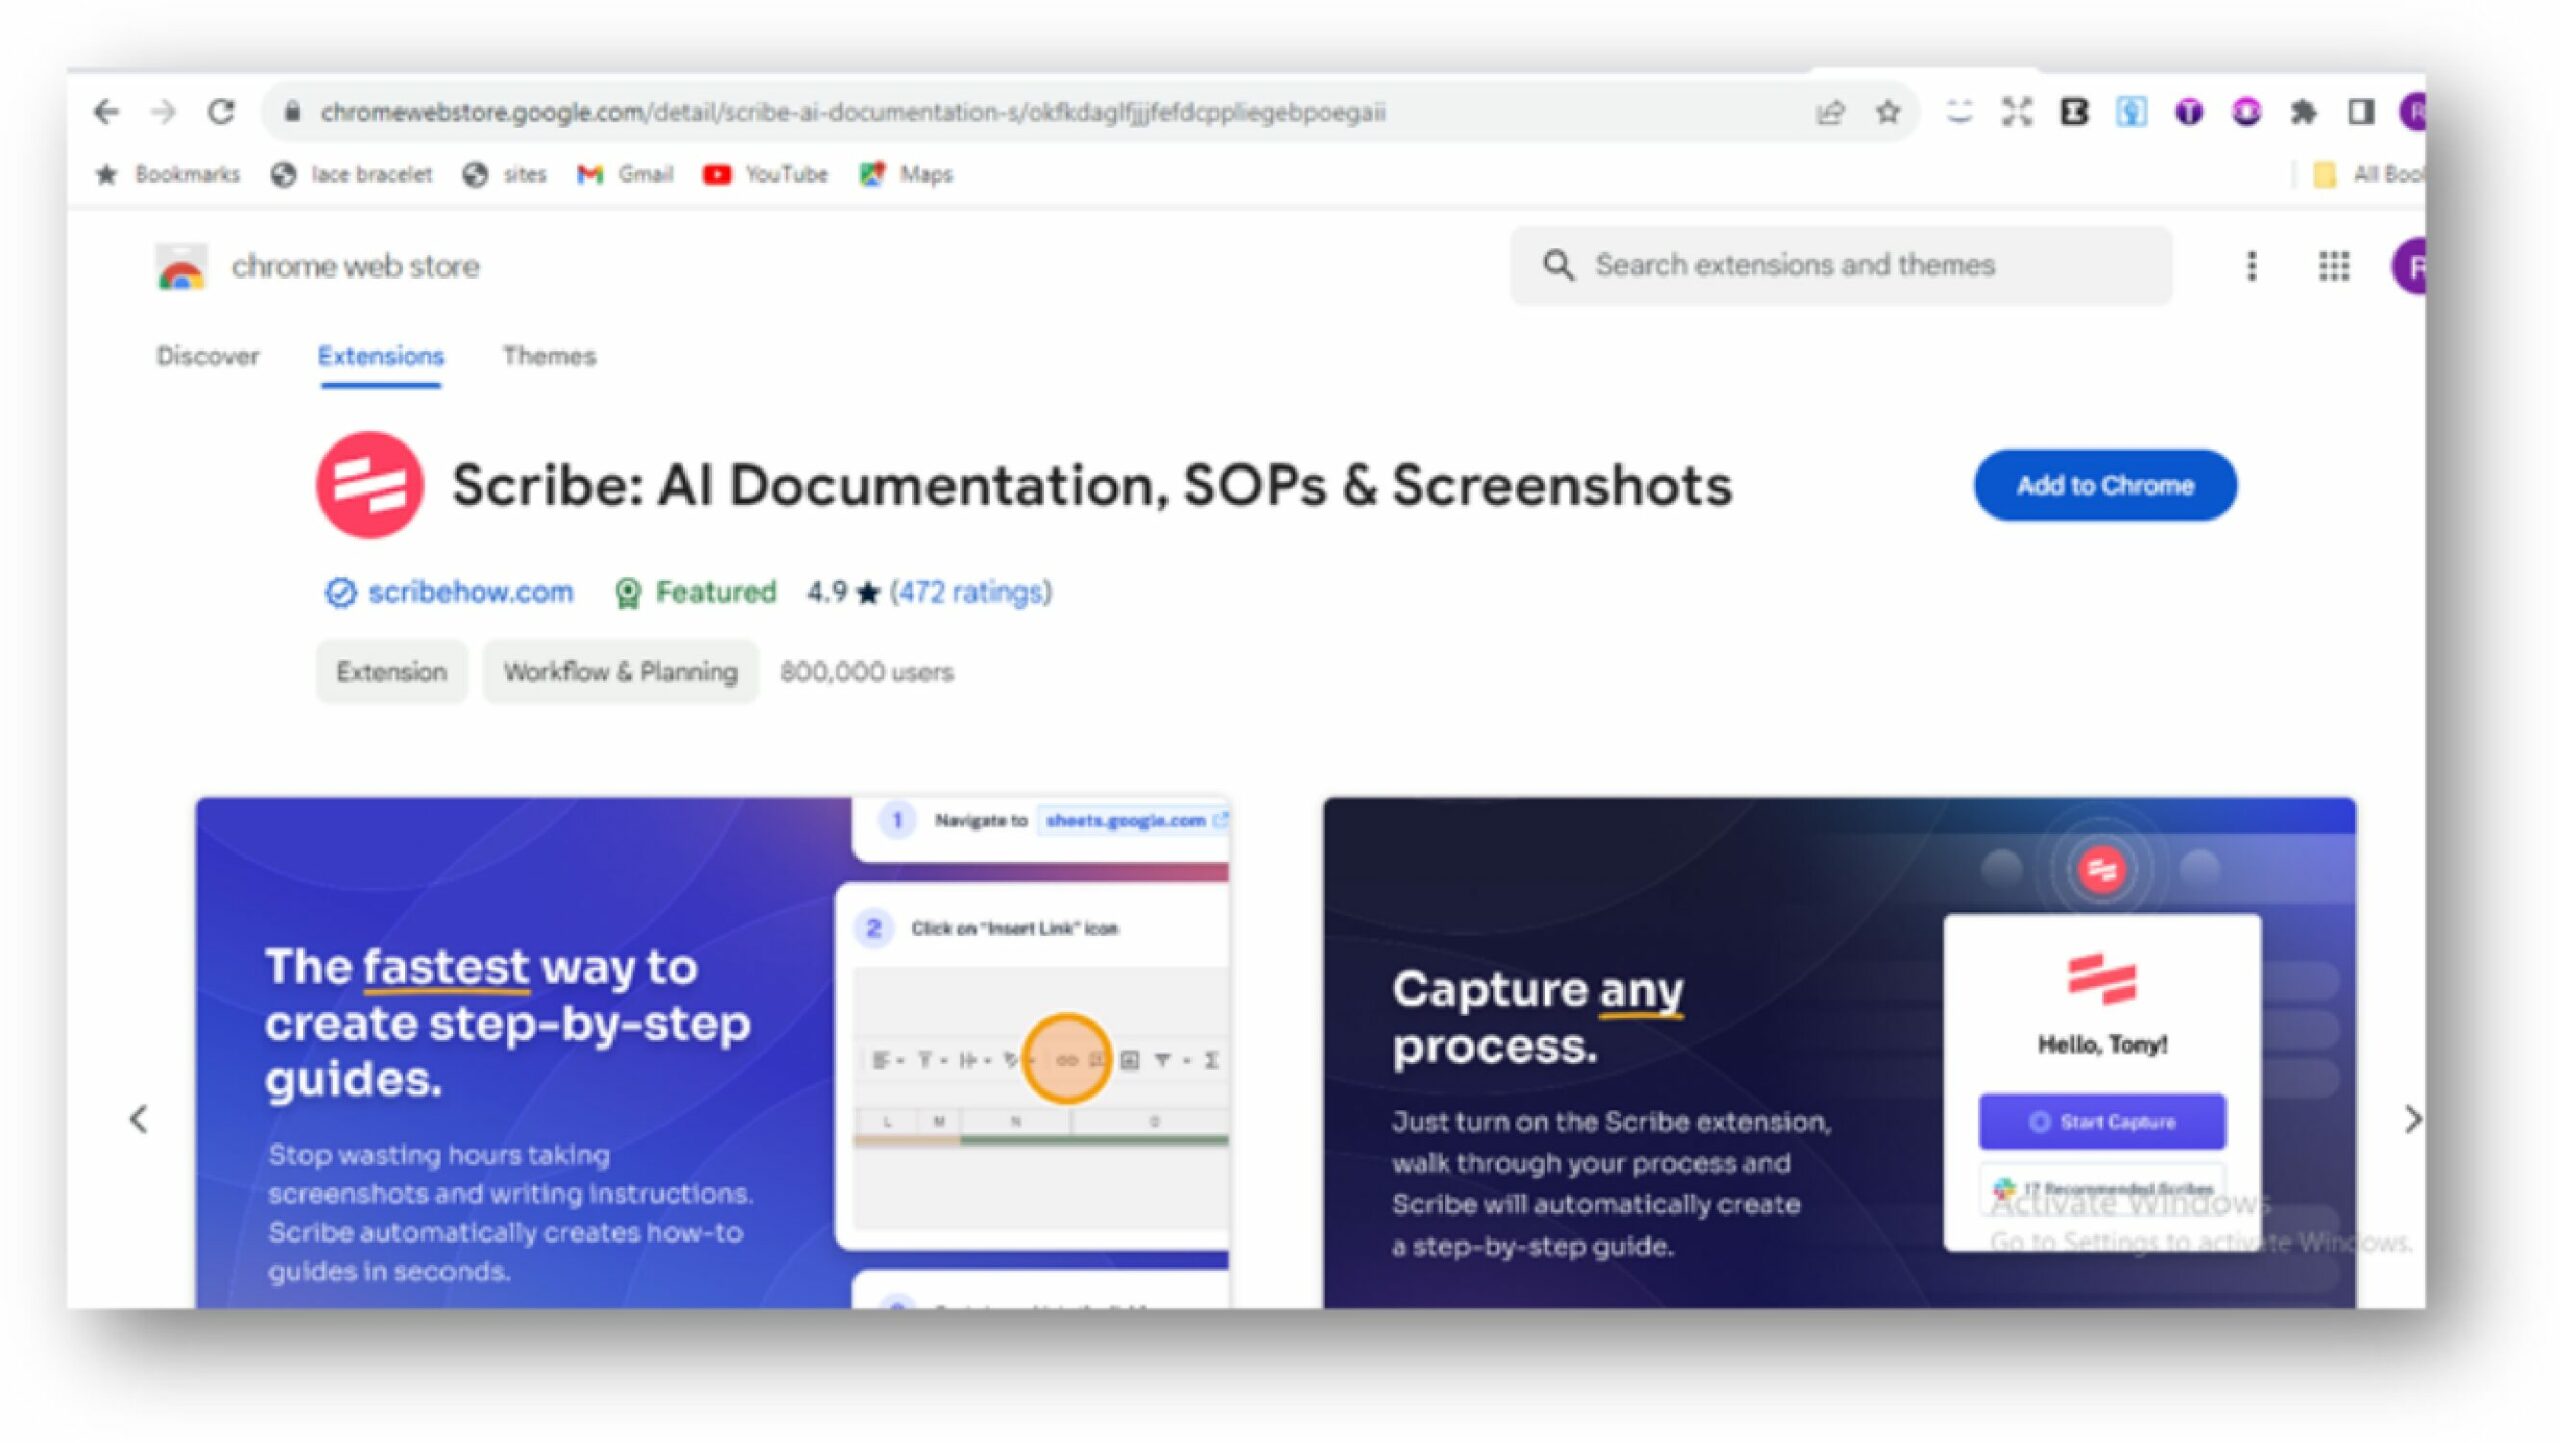 Download and Install the Scribe Extension